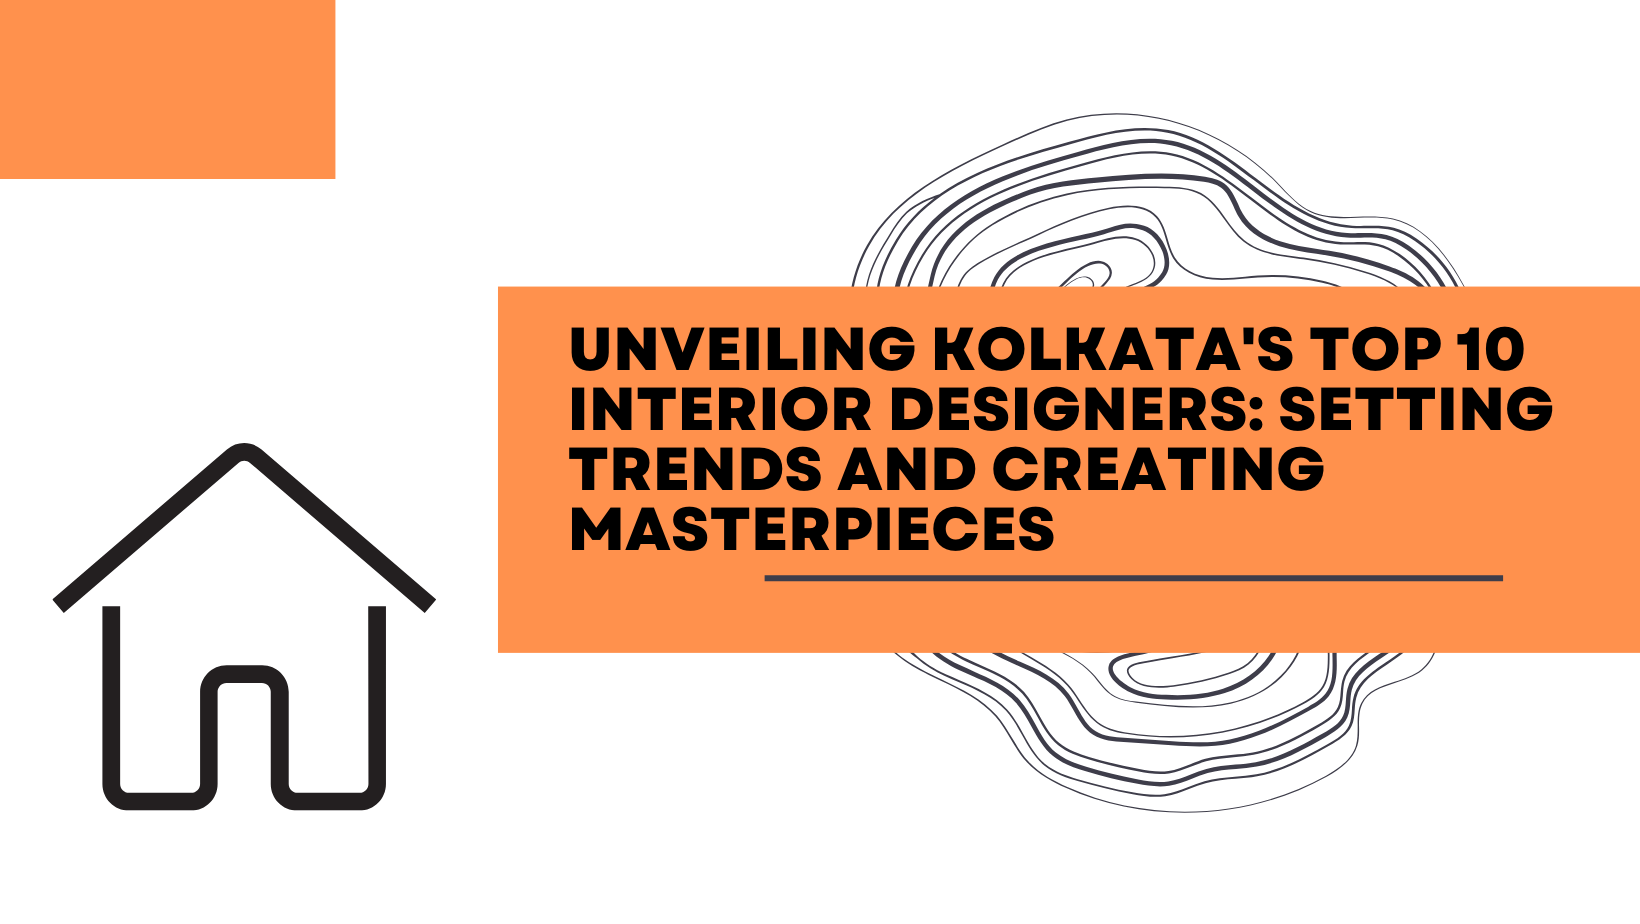 Unveiling Kolkata’s Top 10 Interior Designers: Setting Trends and Creating Masterpieces